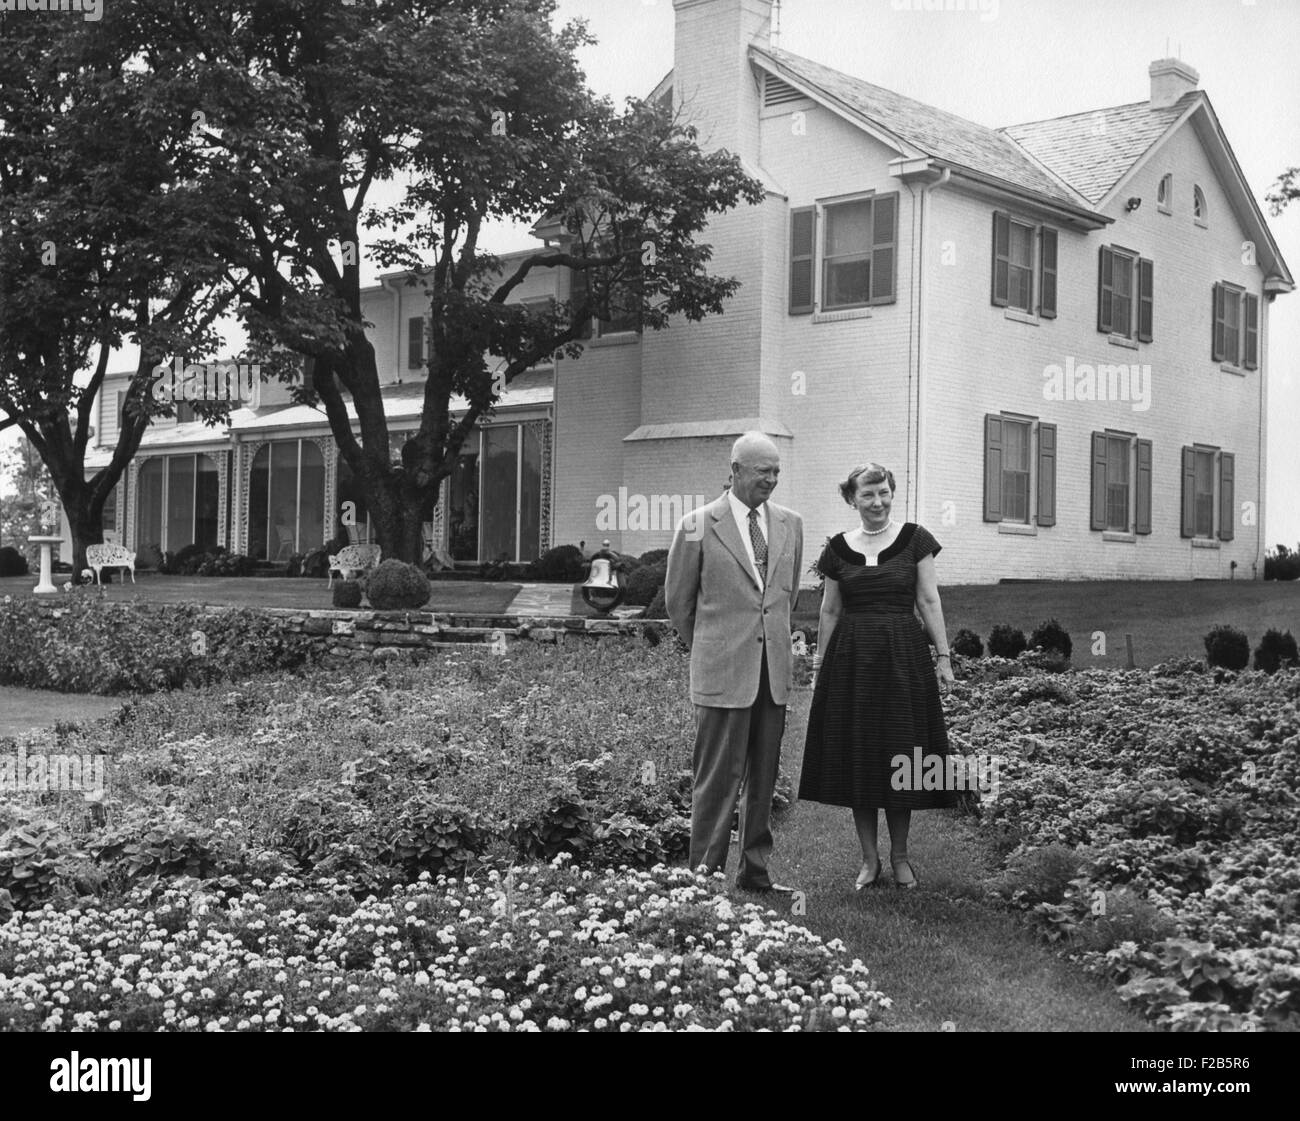 President and Mamie Eisenhower in the garden of their Gettysburg home. Sept 16, 1956. - (BSLOC 2014 16 86) Stock Photo